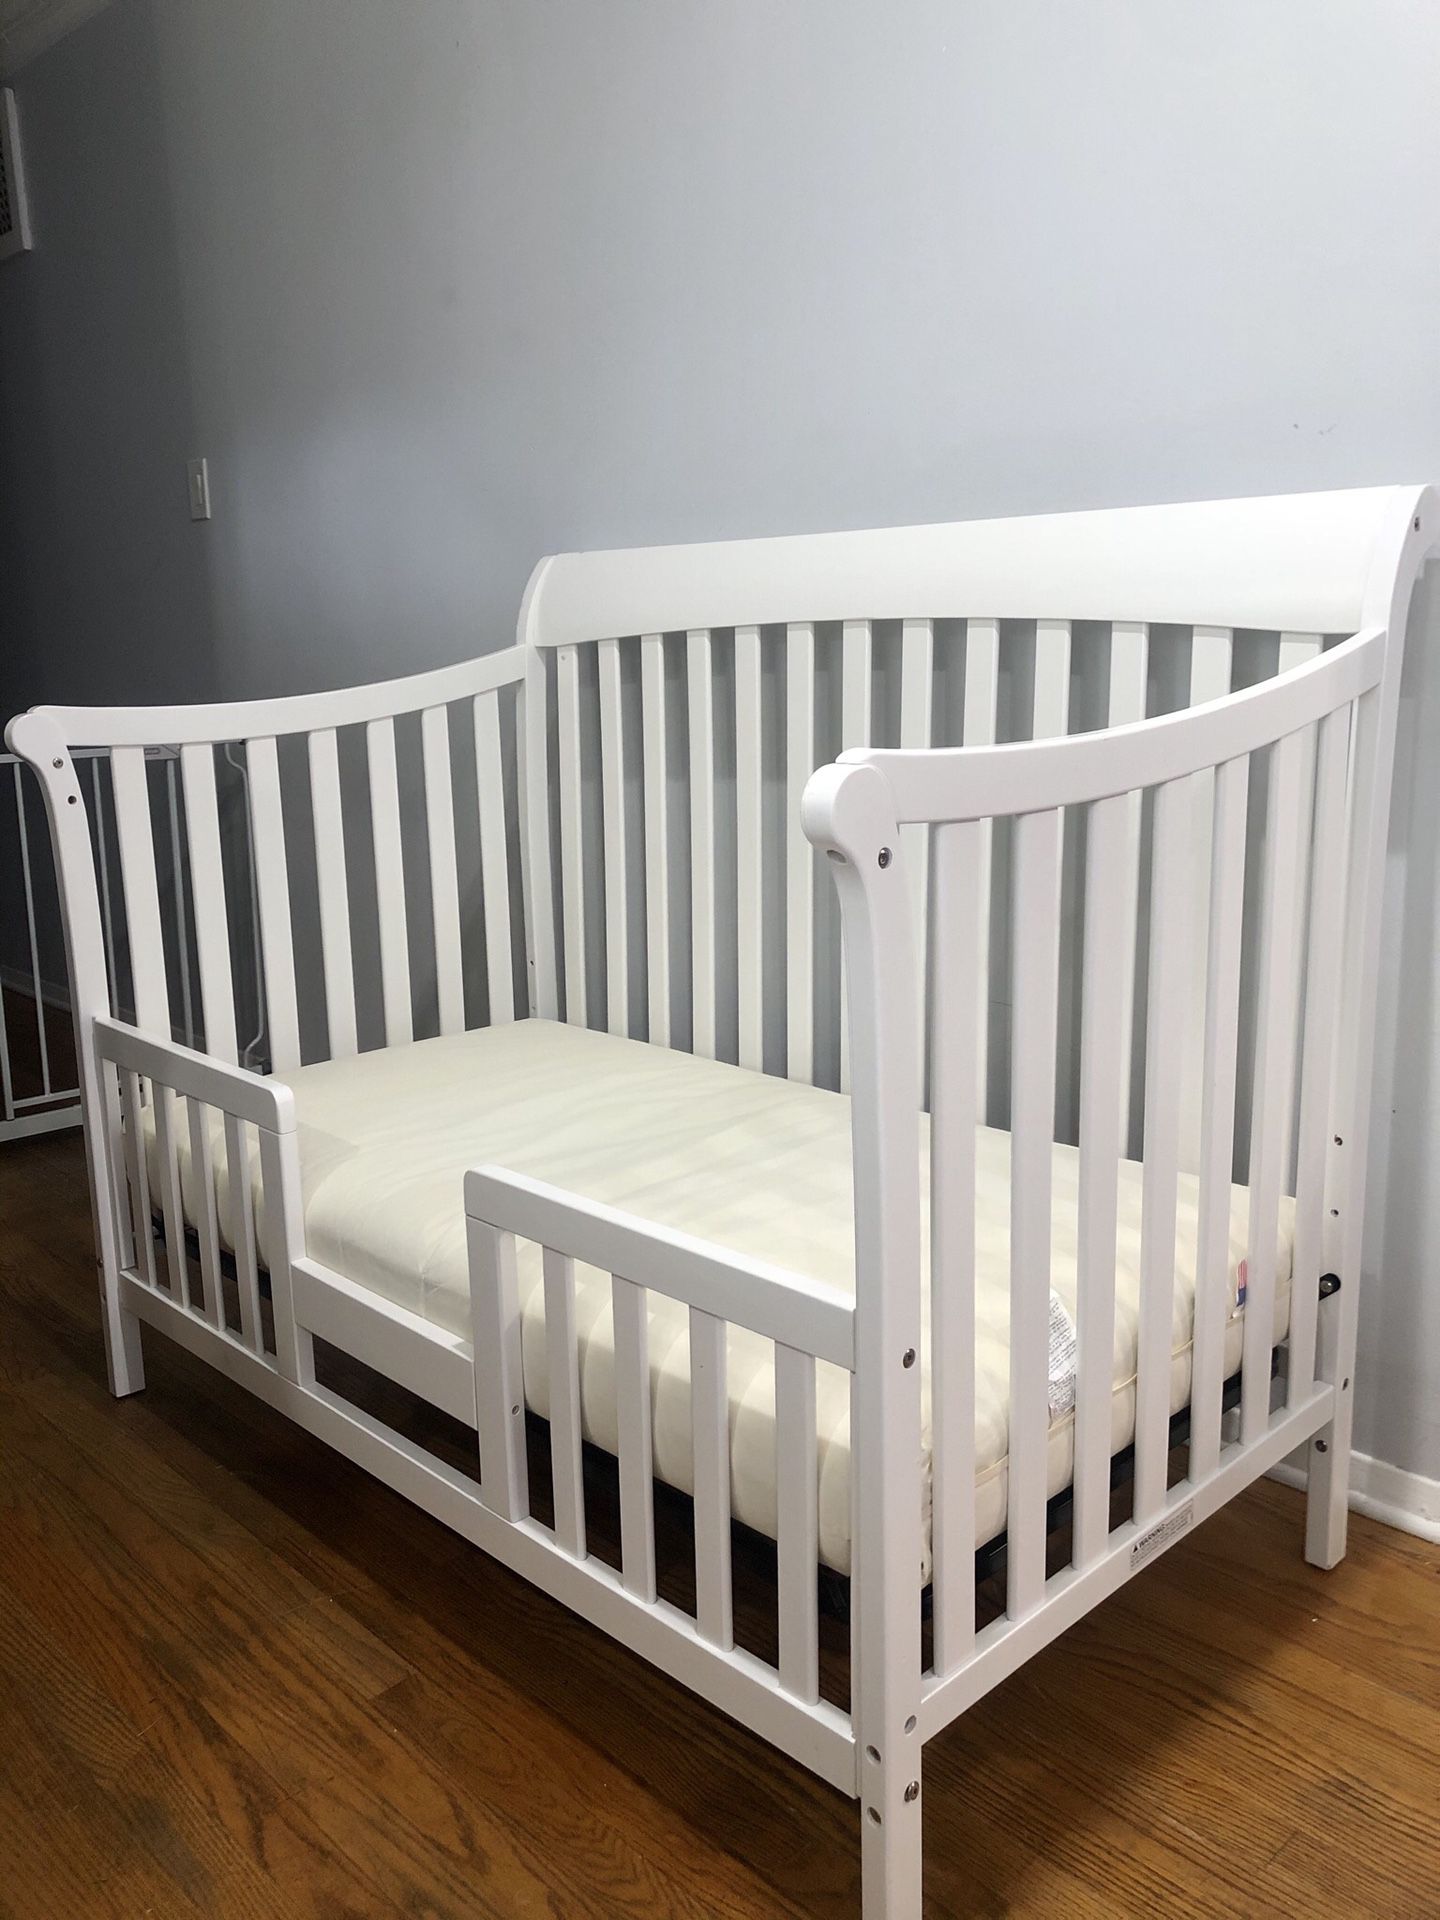 Toddler bed with mattress an excellent condition